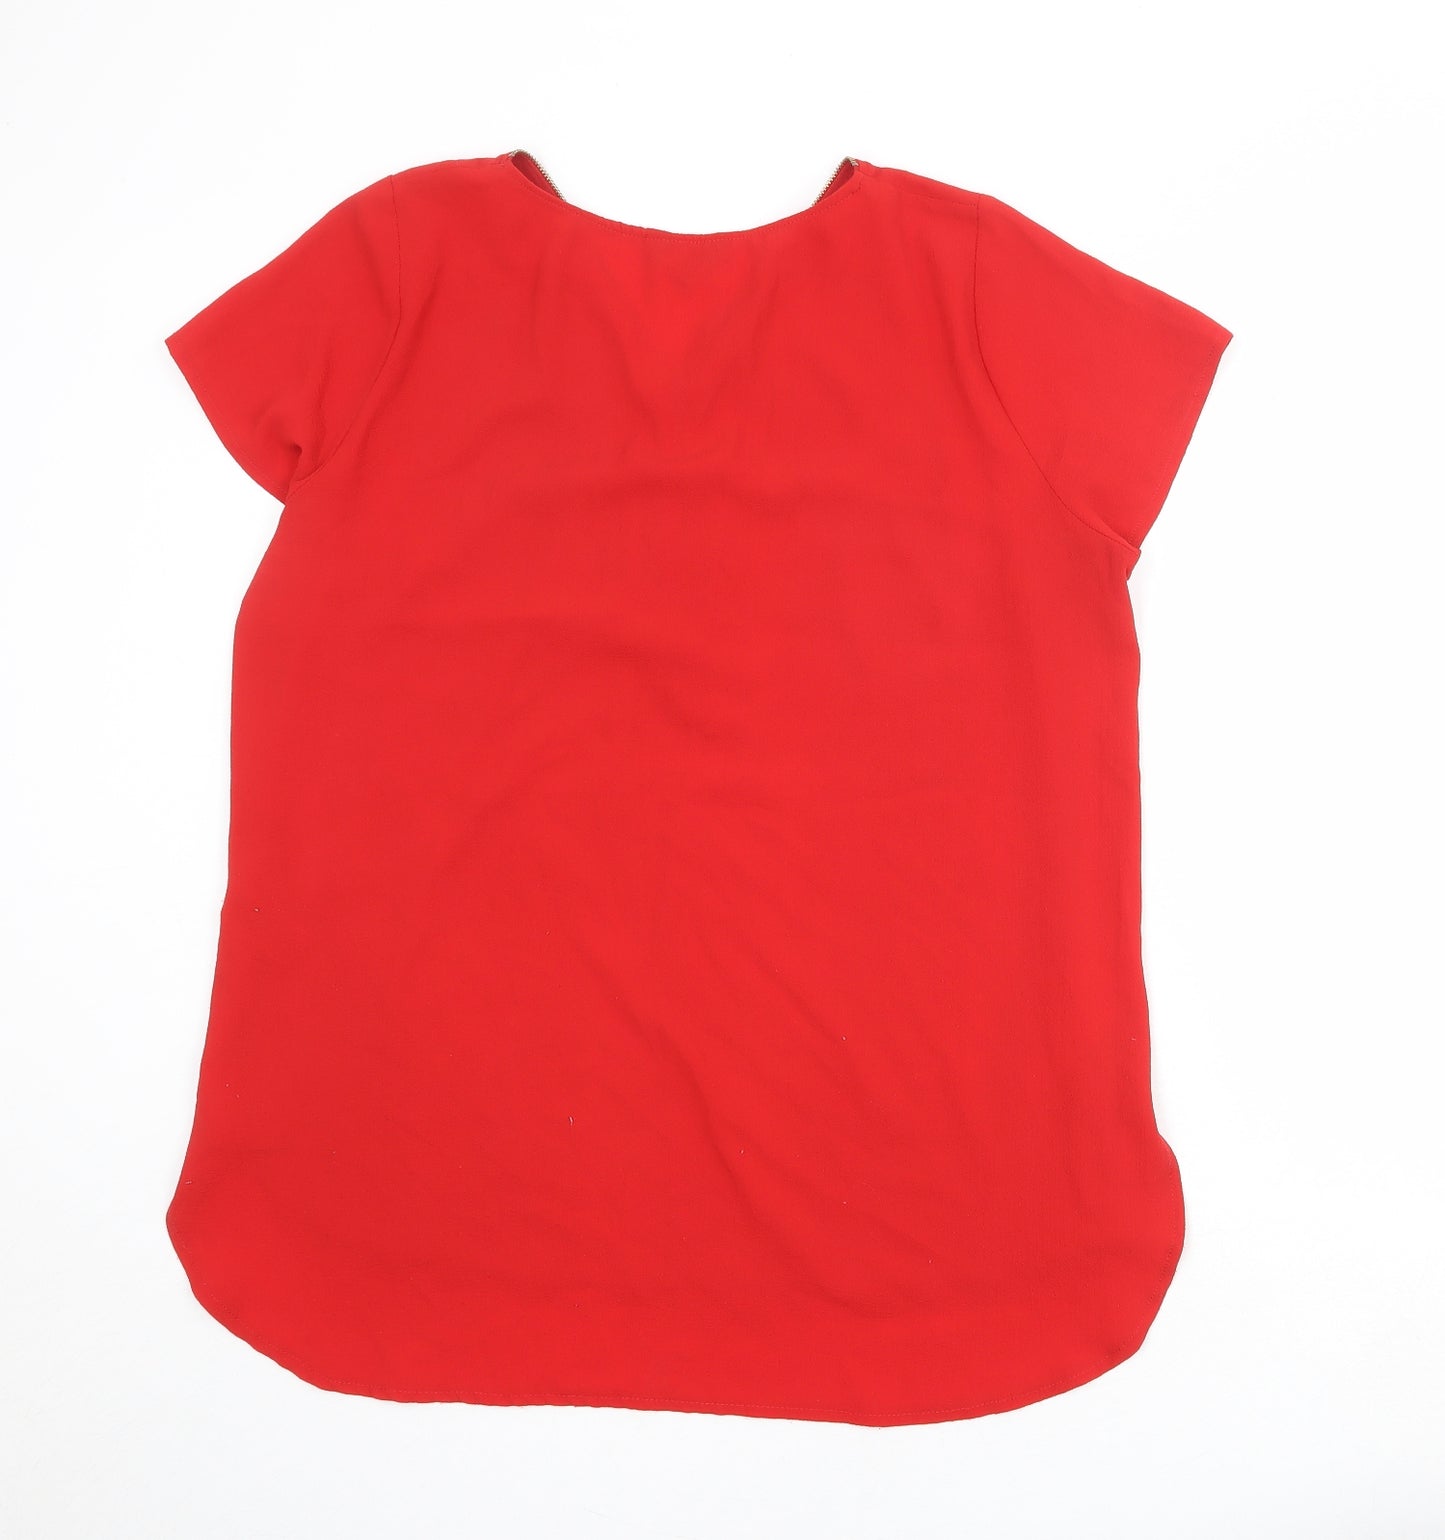 New Look Womens Red Polyester Basic T-Shirt Size 18 V-Neck